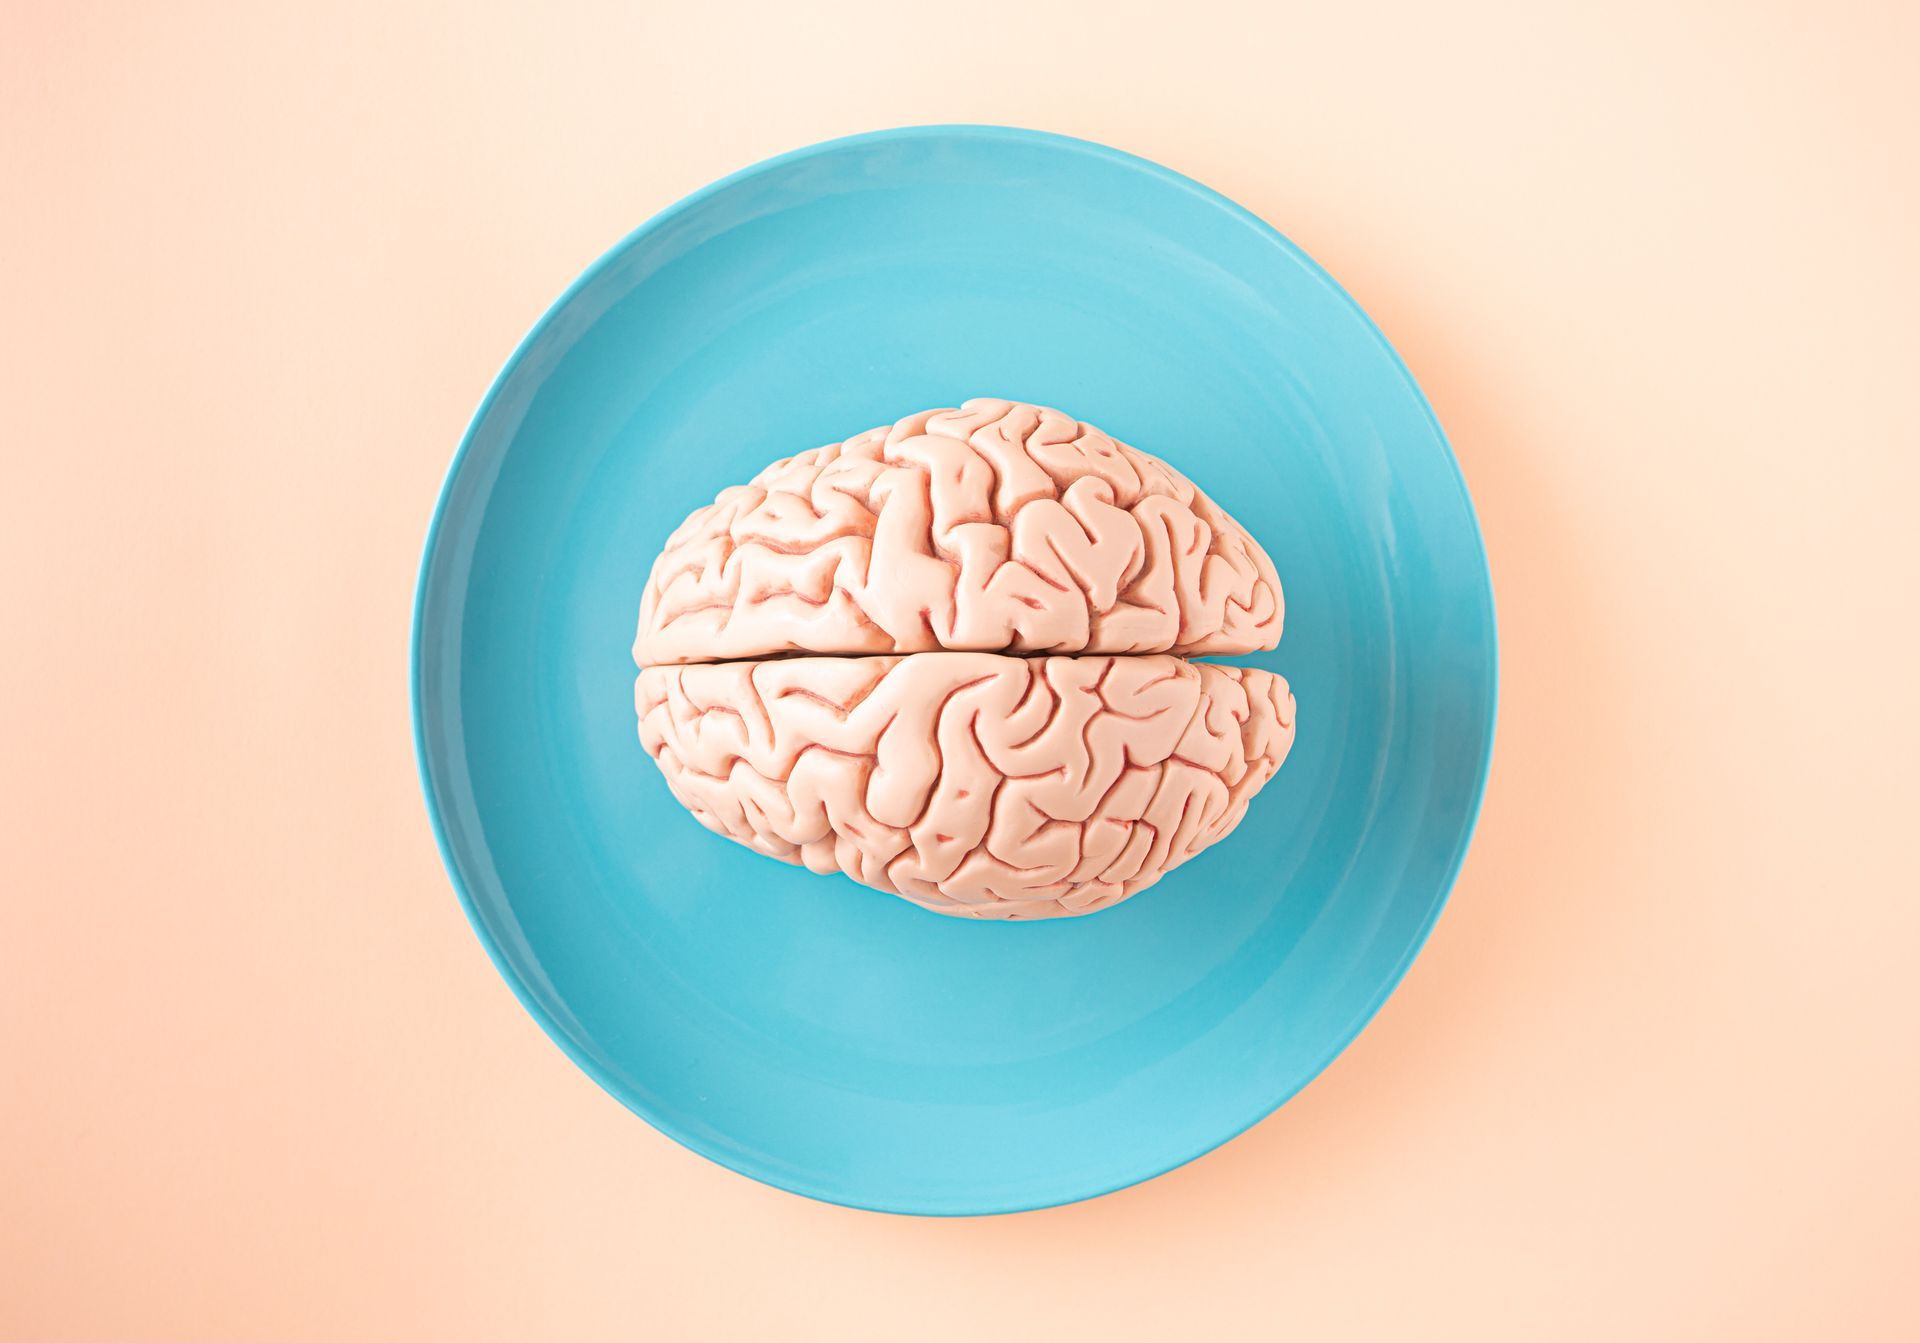 A brain is on a blue plate on a pink background.